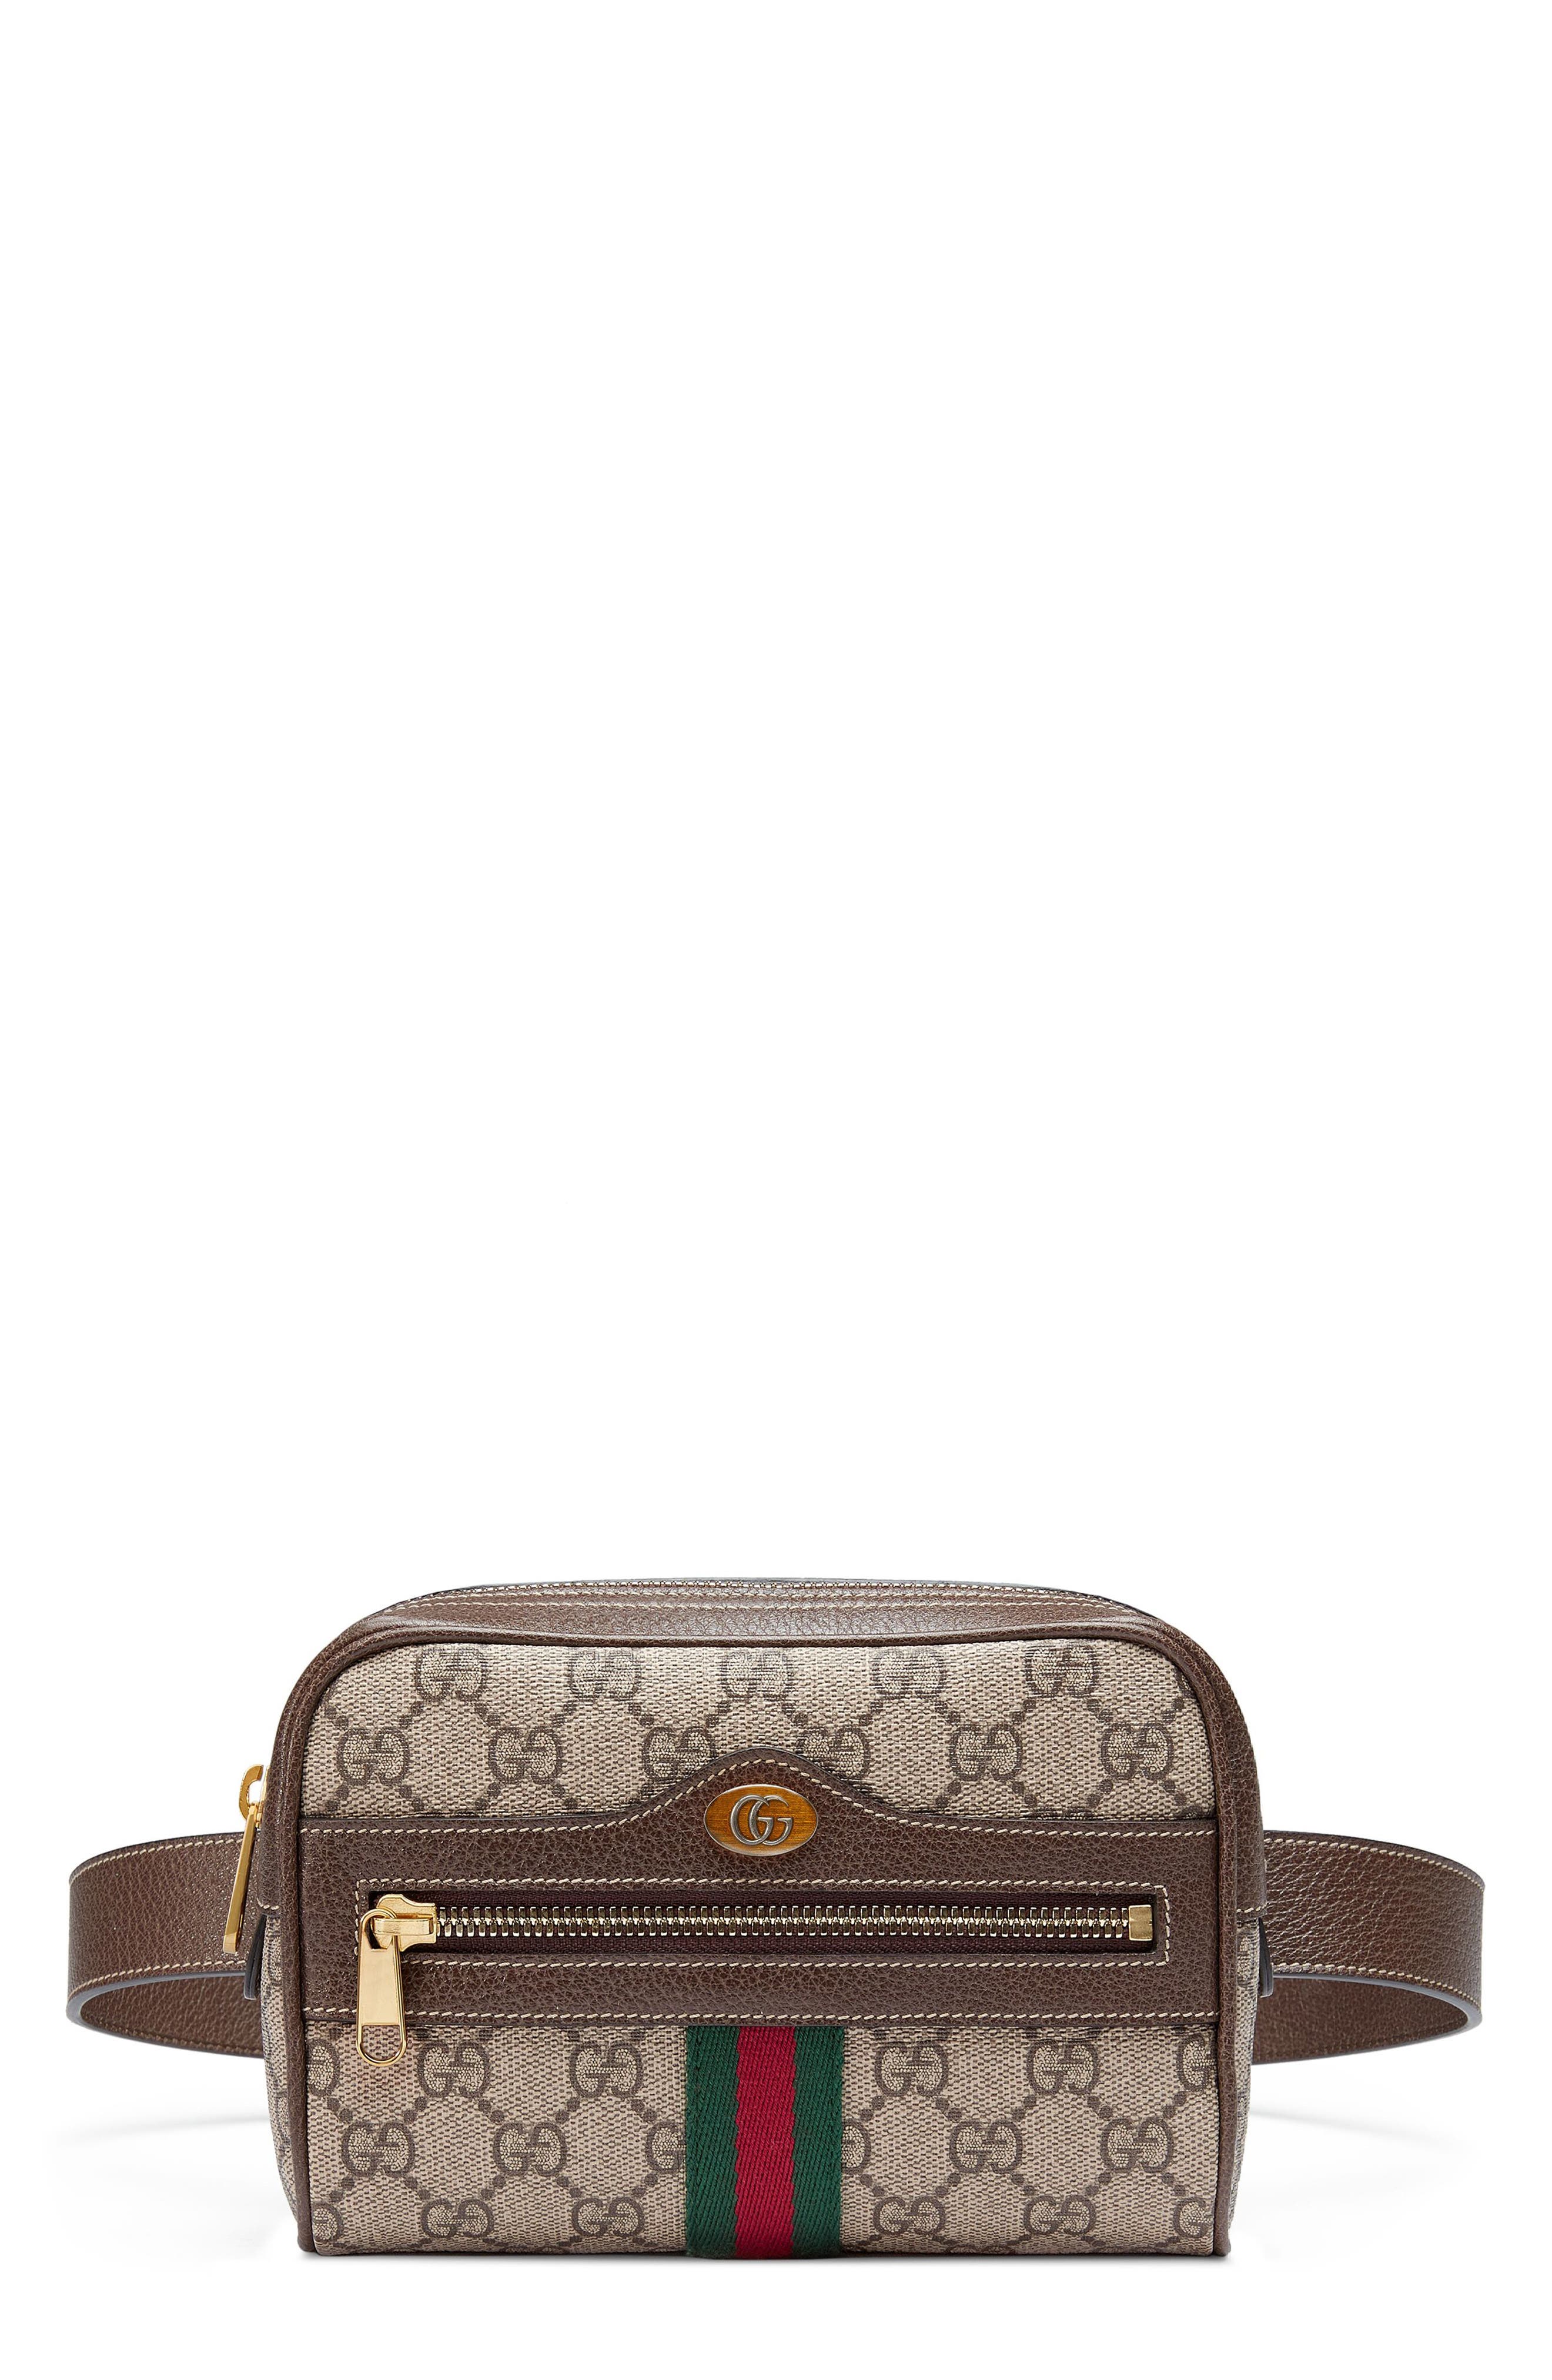 gucci flat fanny pack, OFF 75%,Buy!